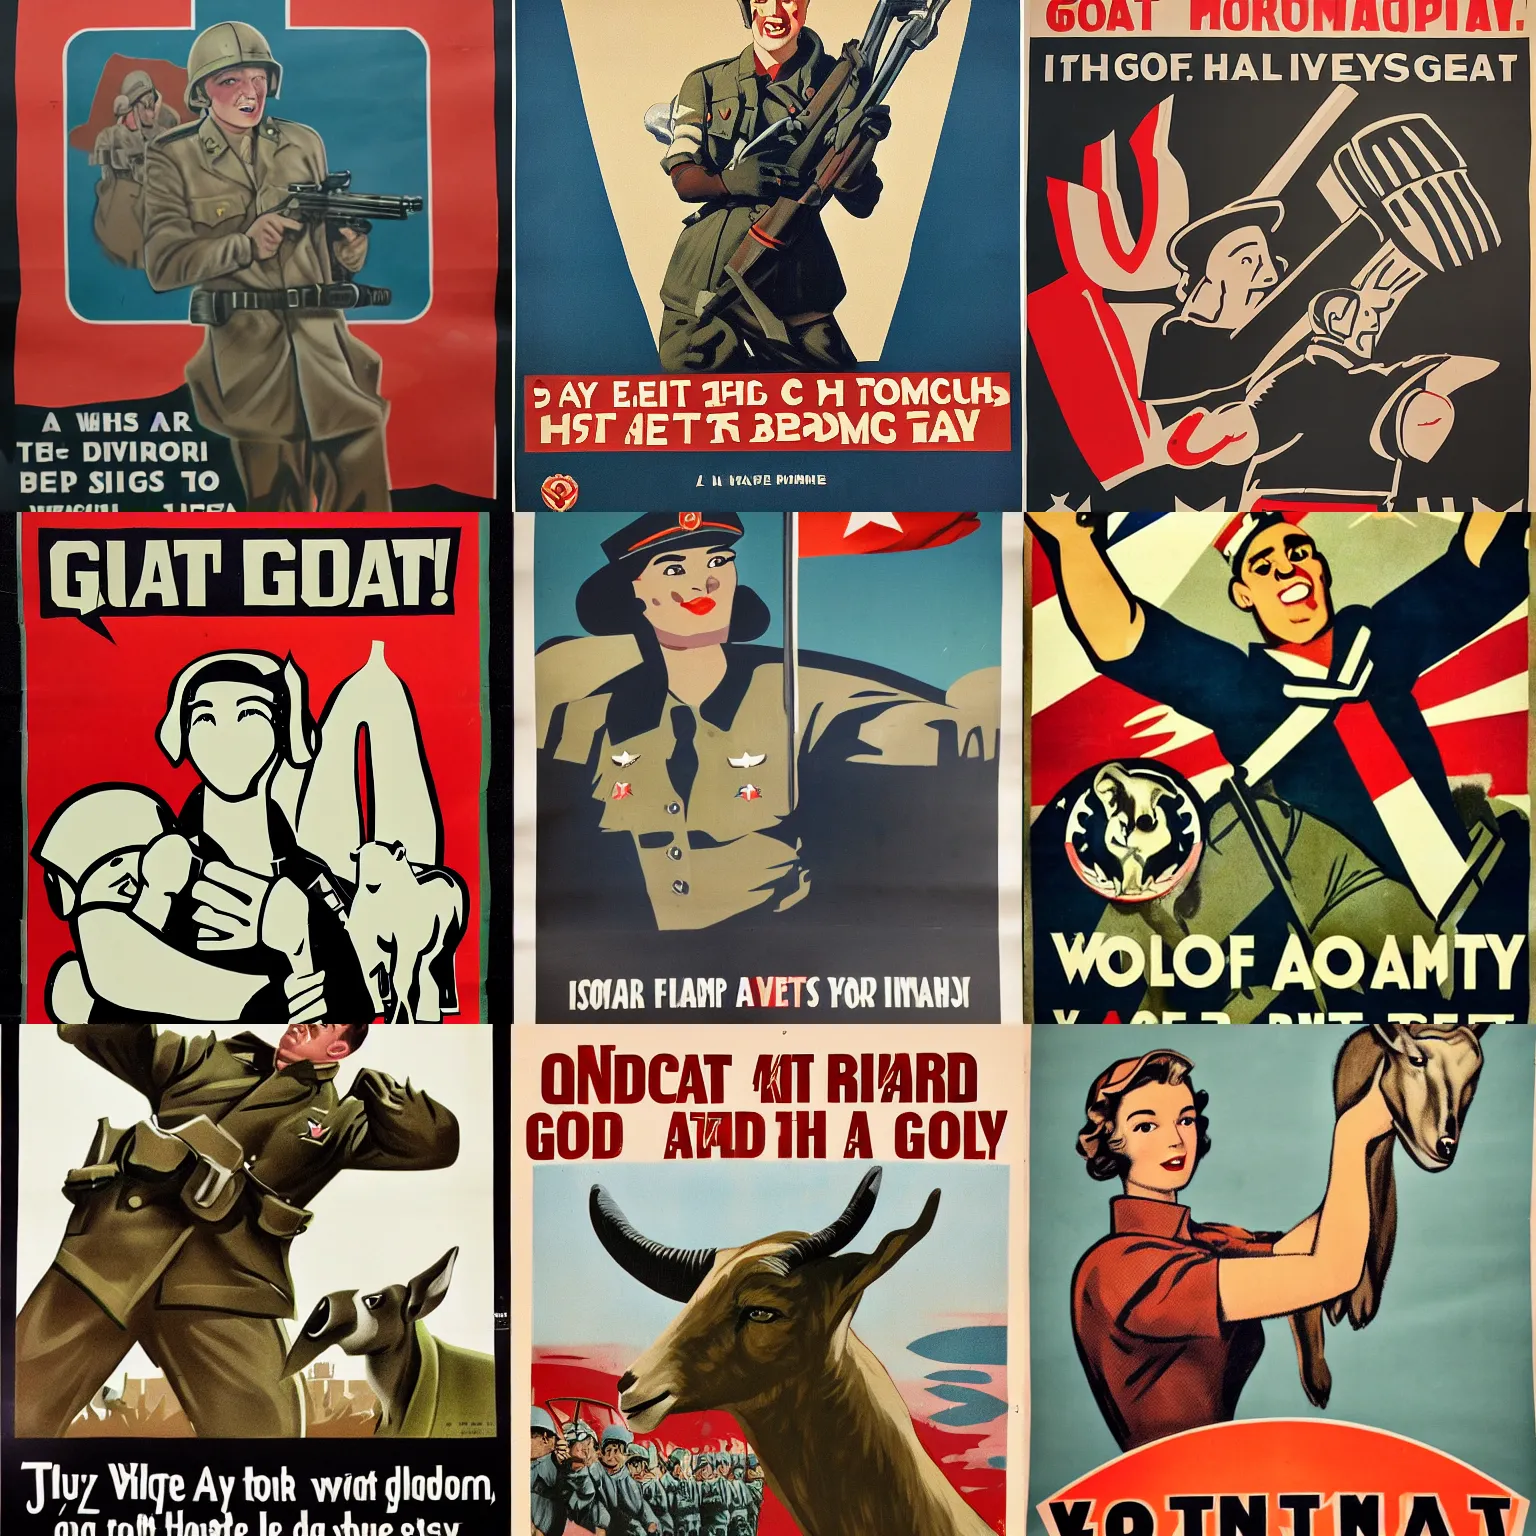 Prompt: wwii - era propaganda poster for the goat army